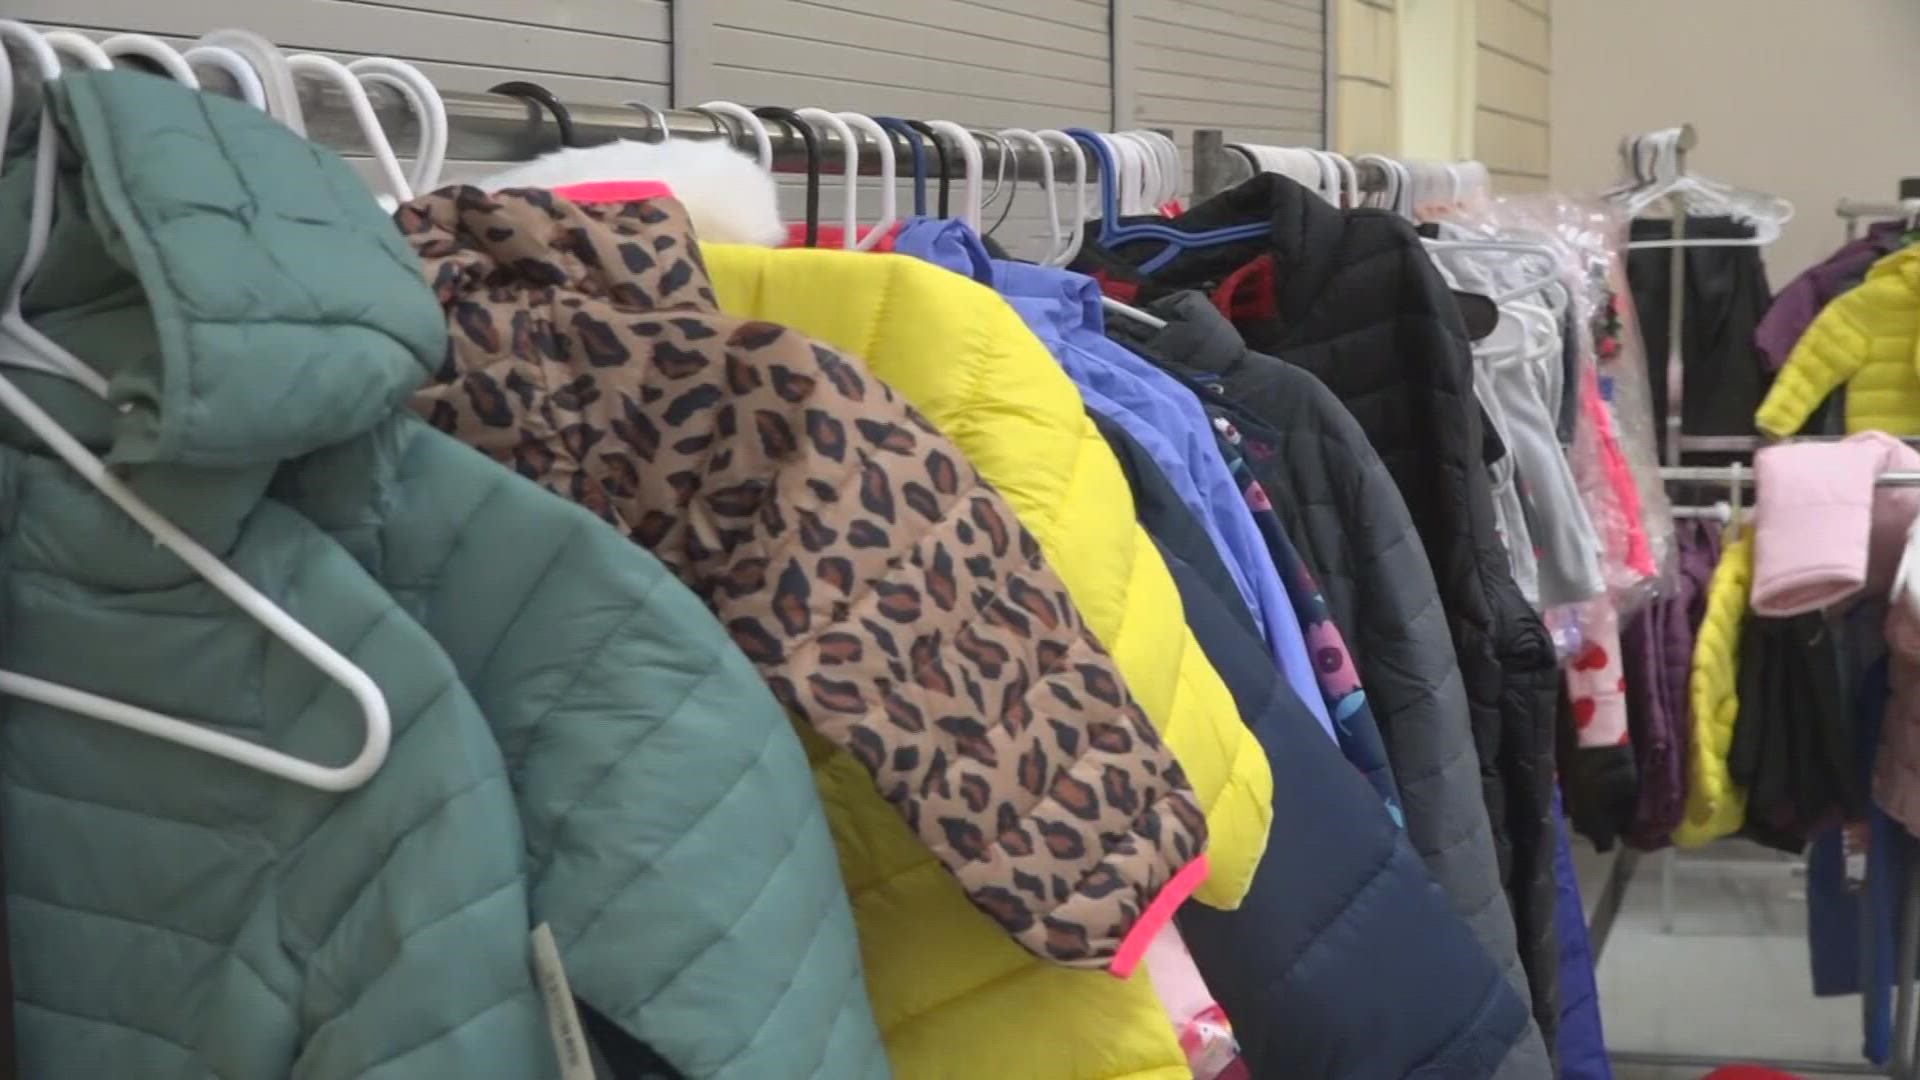 New and gently used coats and toys are still being accepted at locations throughout the state through Dec. 31, and donations will be given out to families in need.